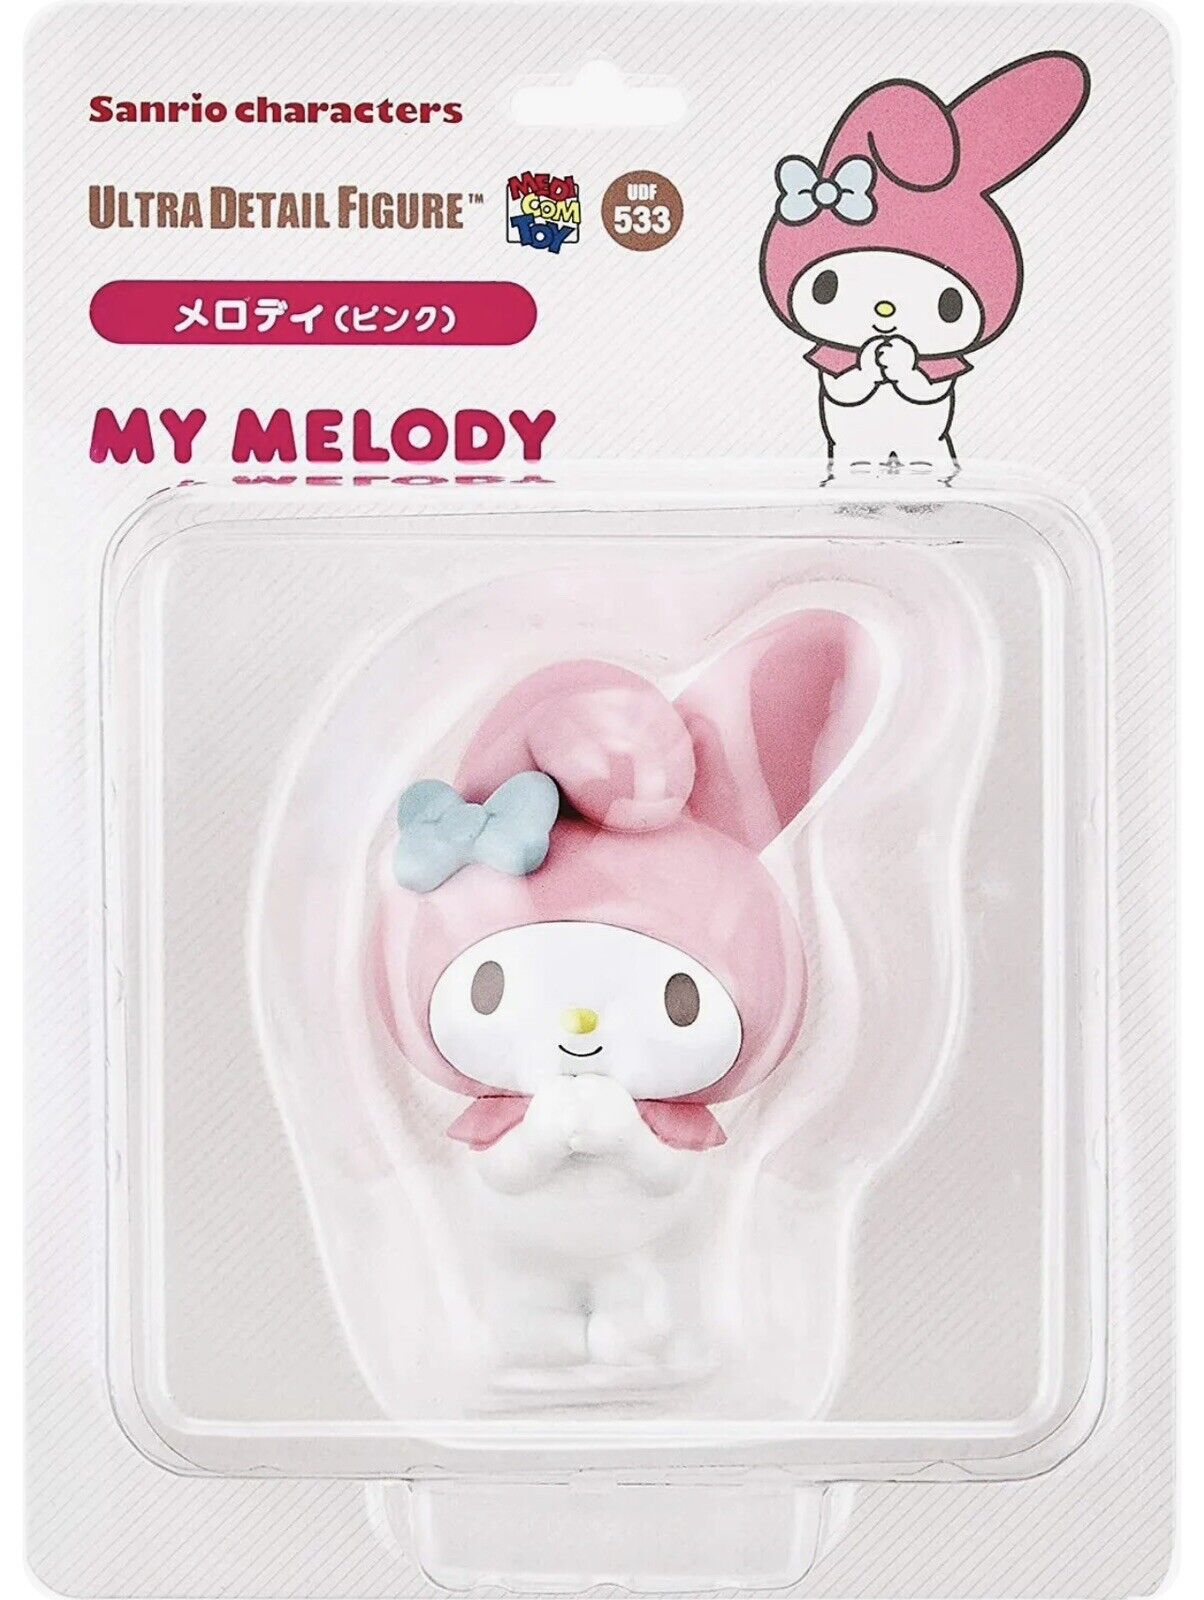 Medicom UDF Ultra Detail Figure Sanrio Characters Series My Melody Pink 90mm